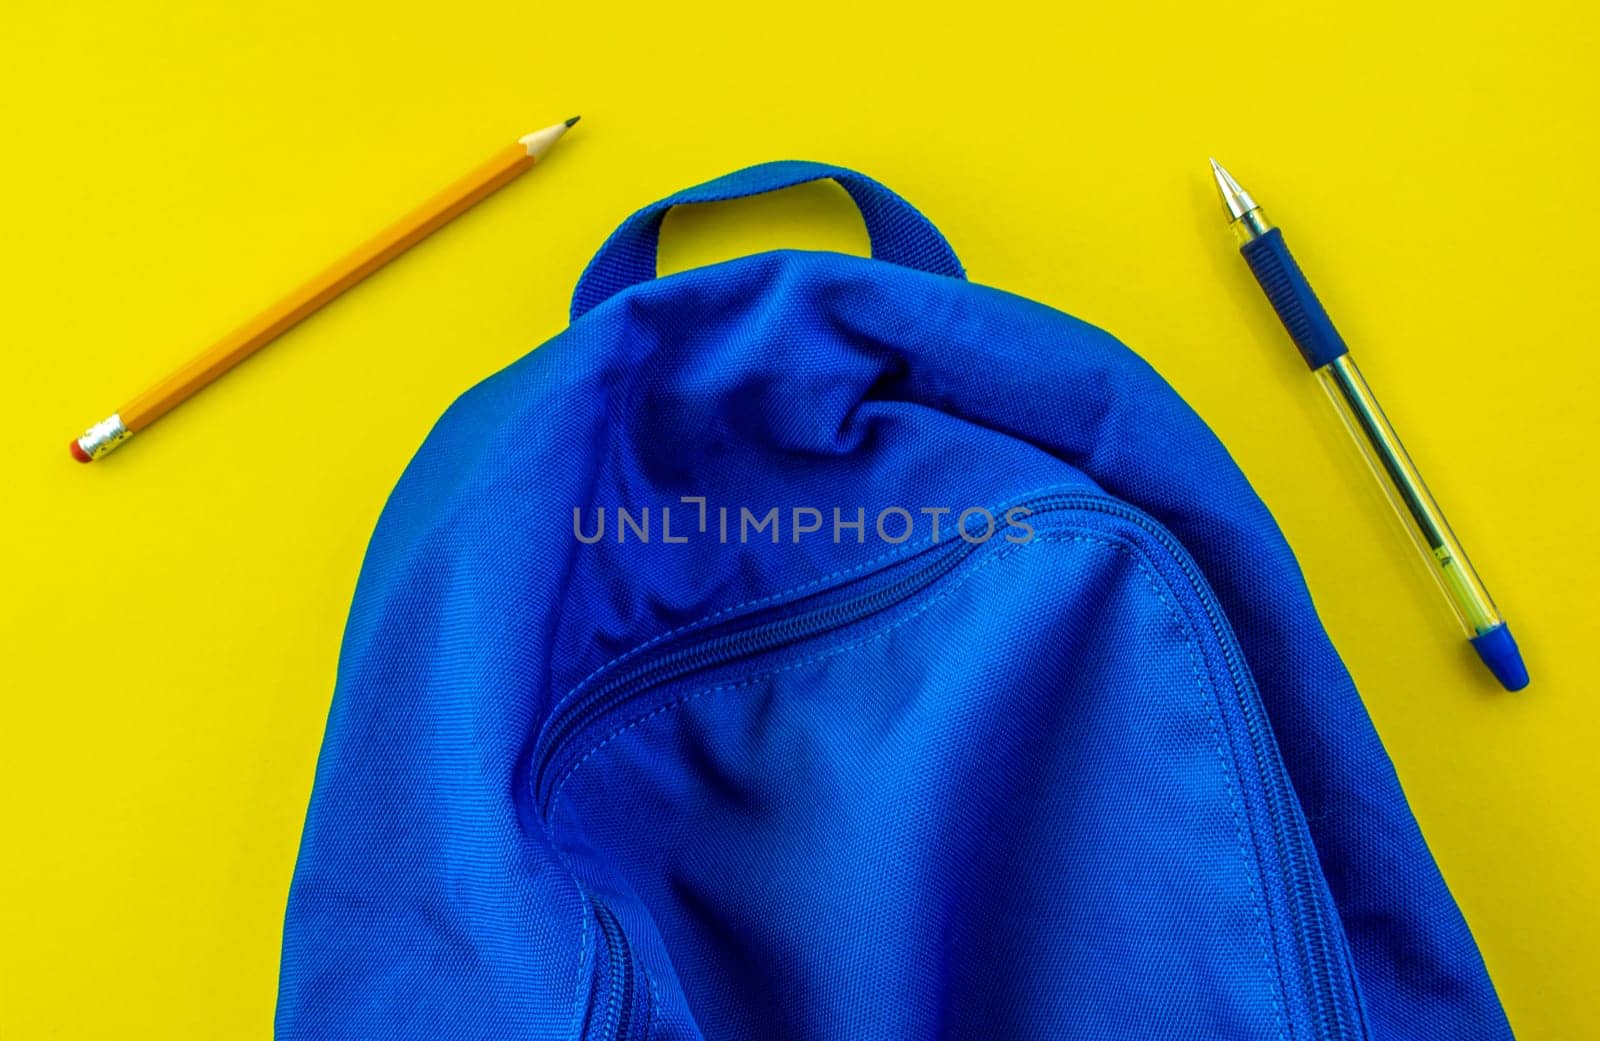 School backpack, pencil, pen on a yellow background. School blue backpack, pencil and pen on a yellow background.